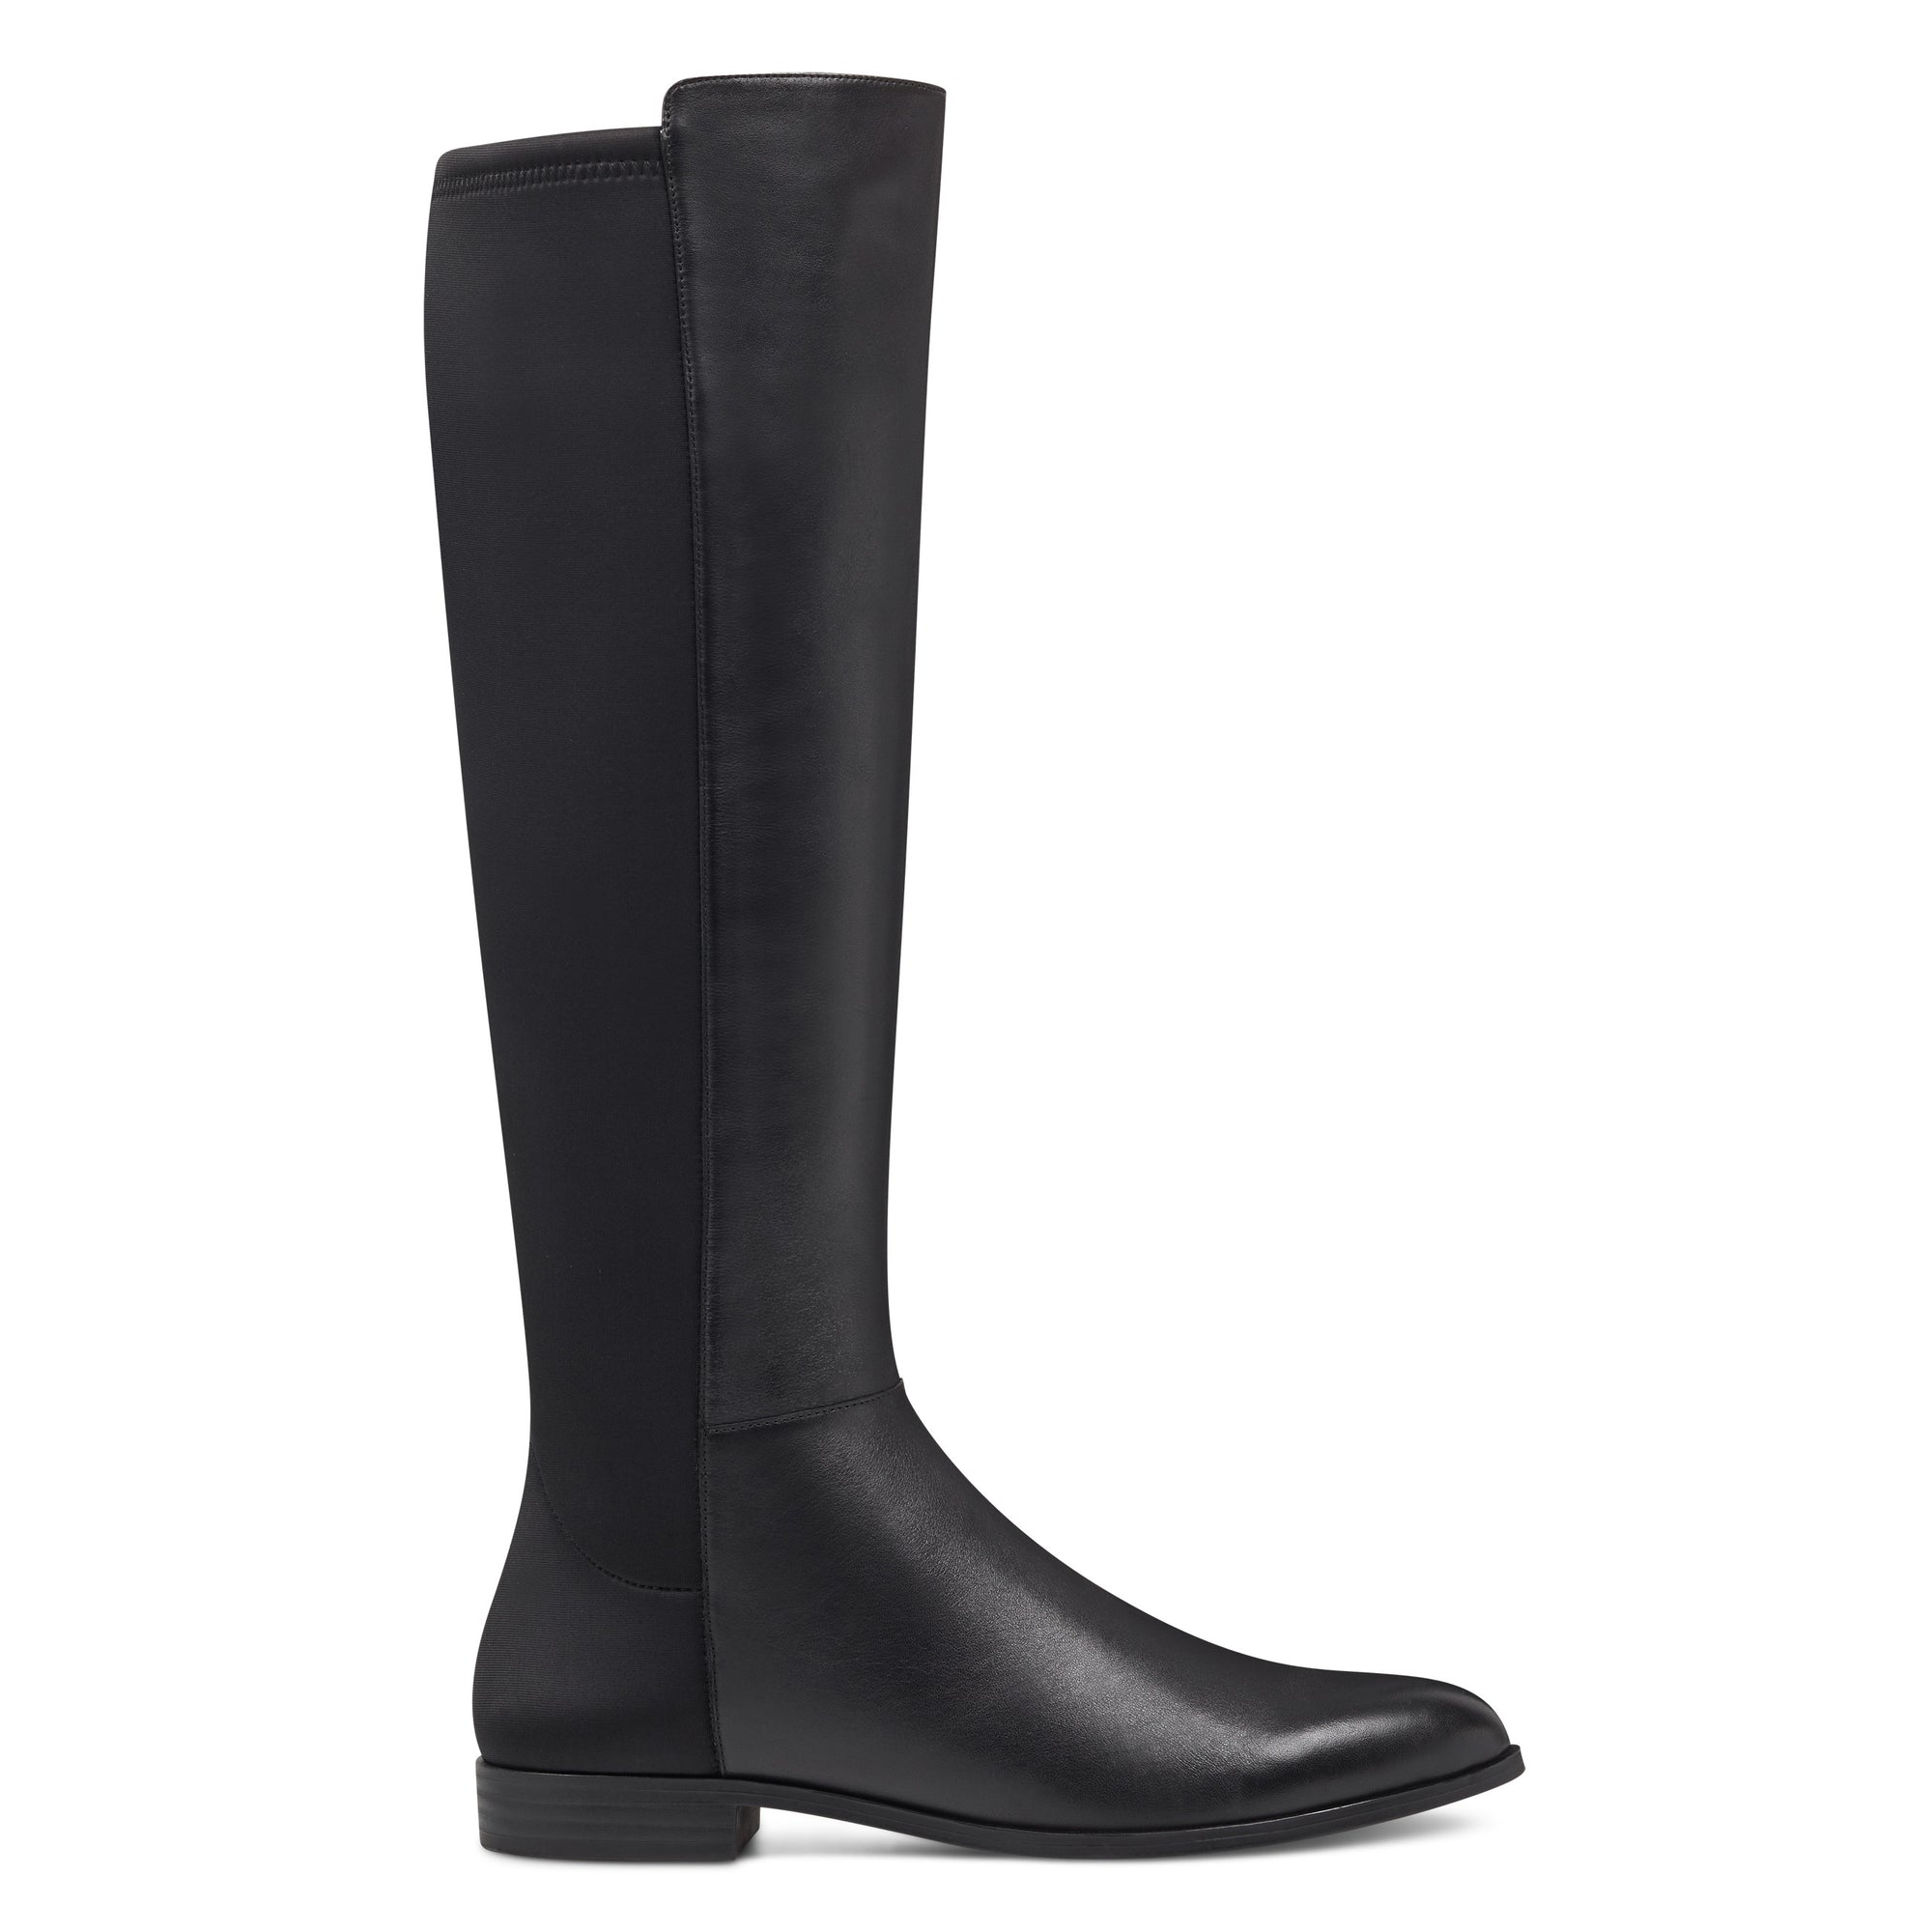 black stretch leather boots